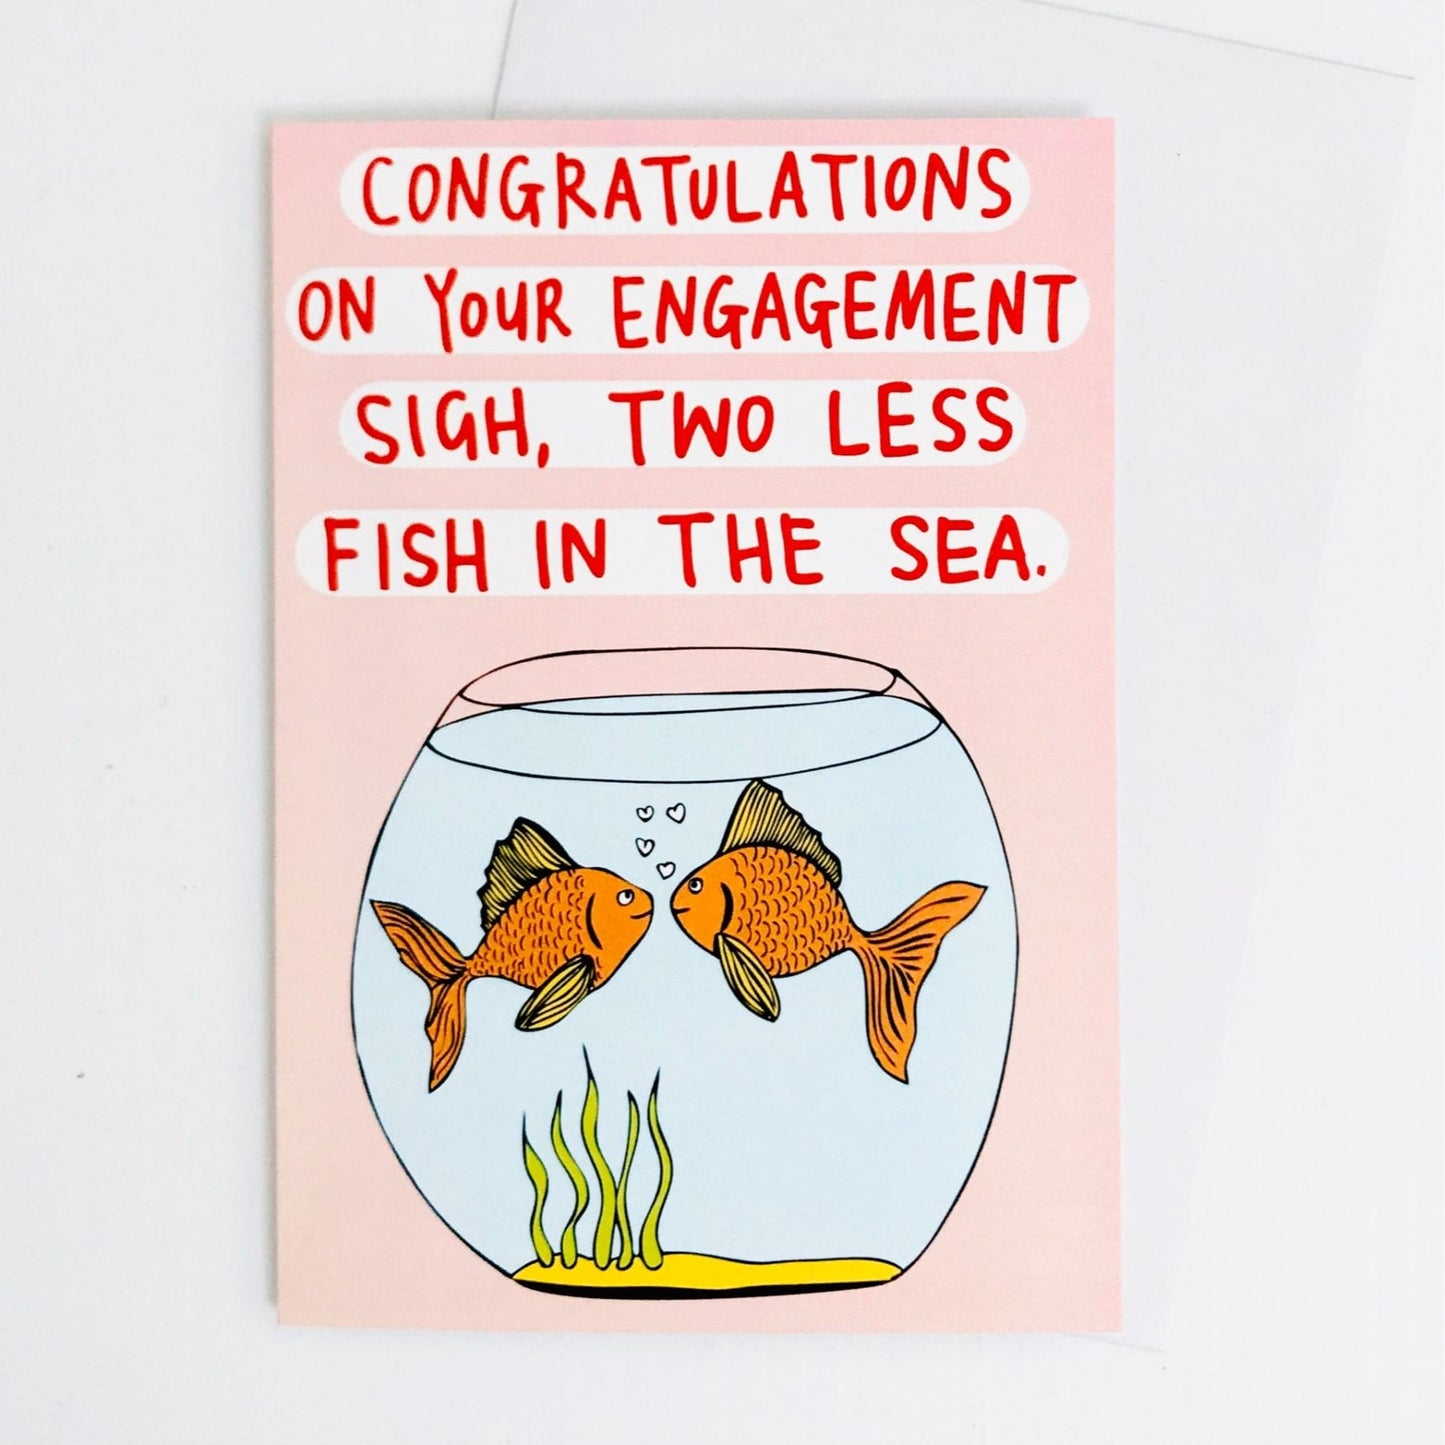 Able and Game Card Congratulations On Your Engagement Sigh, Two Less Fish In The Sea